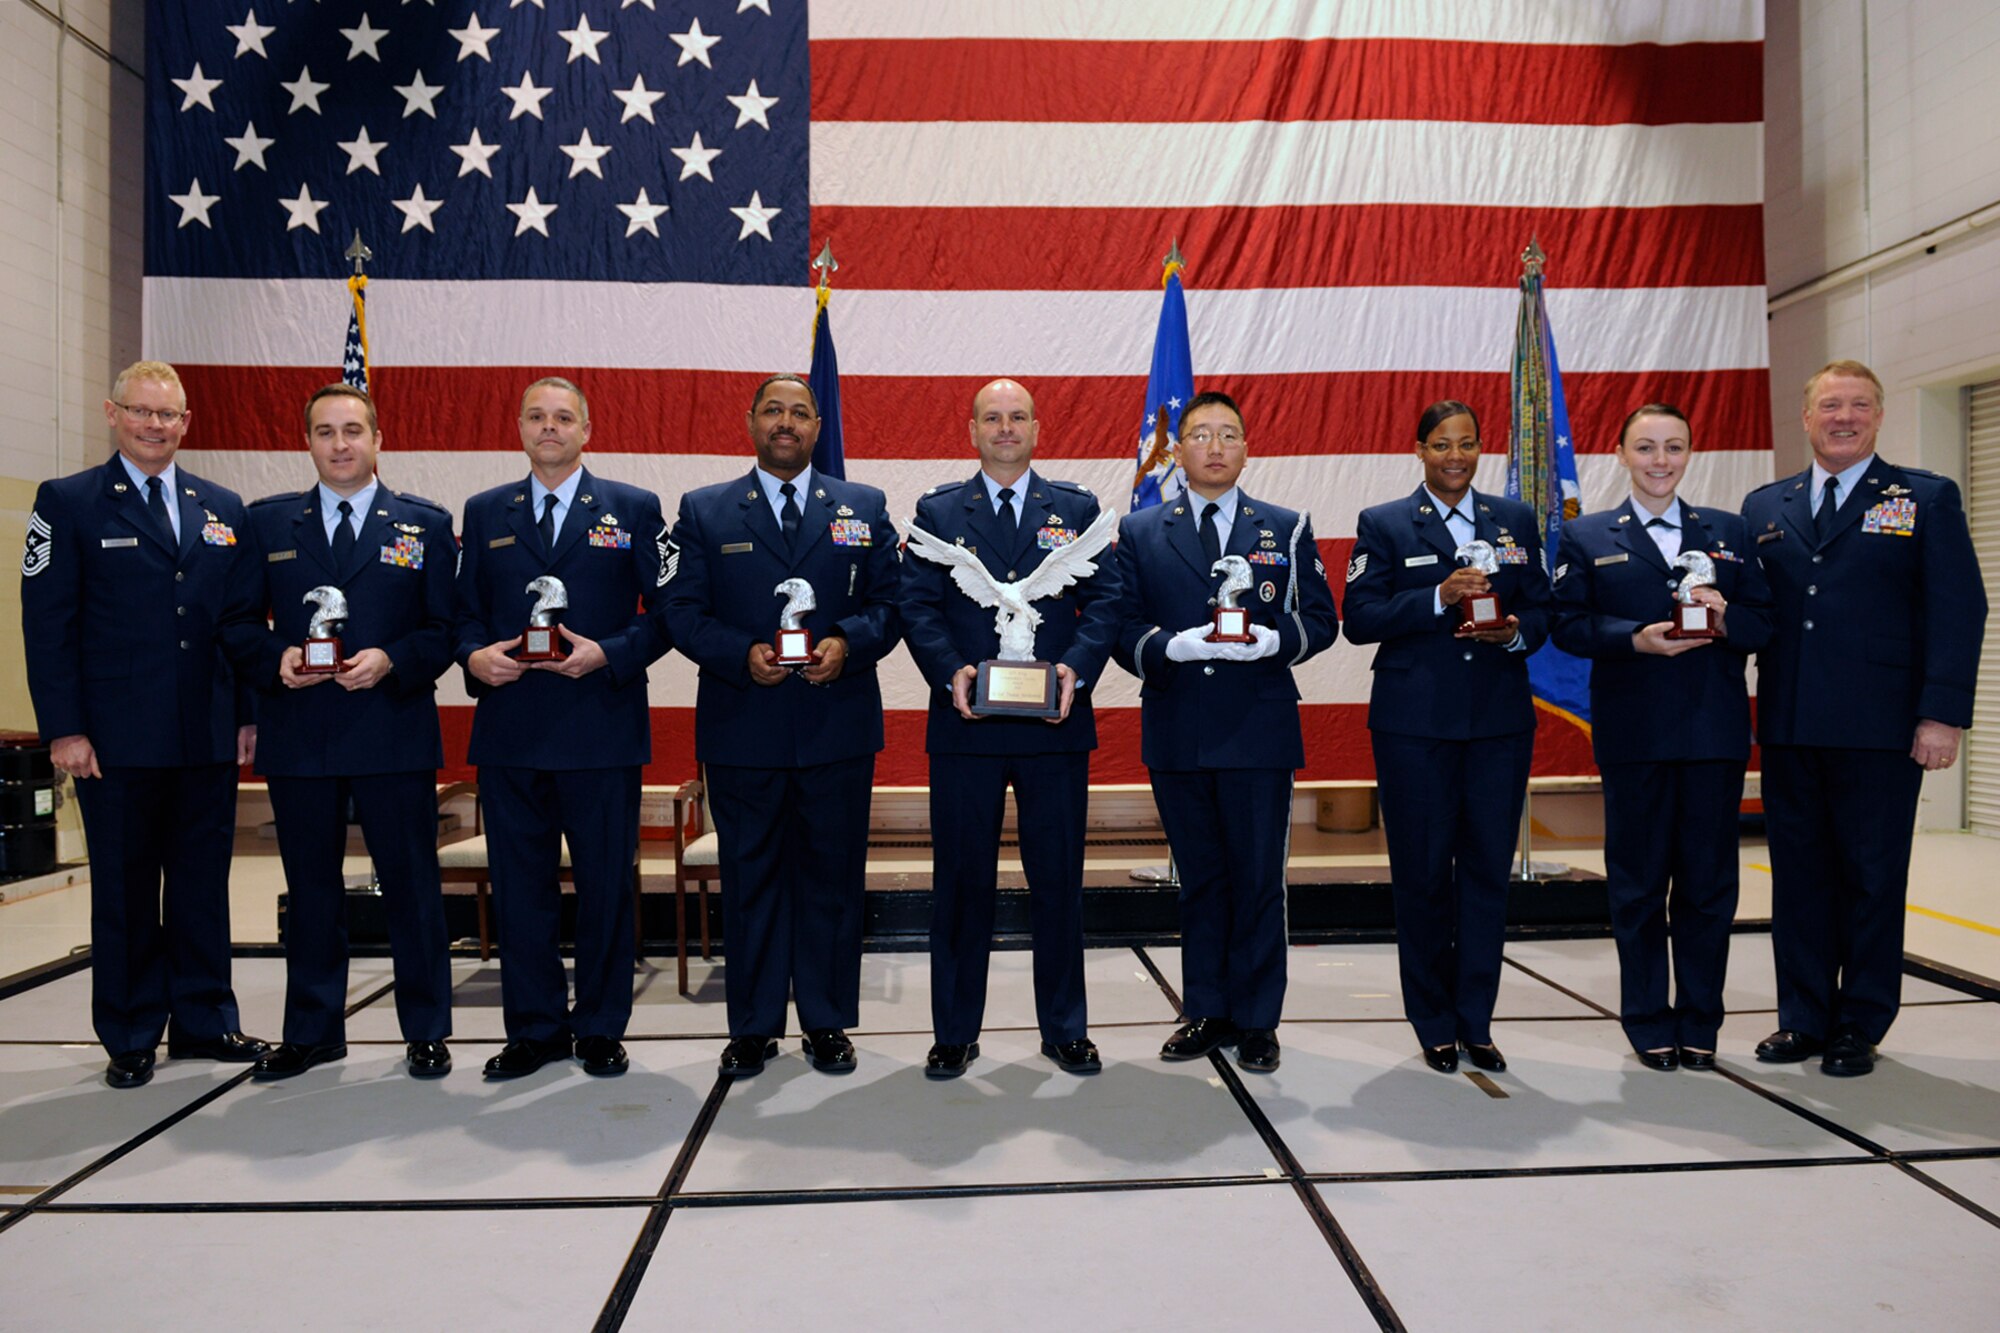 131208-Z- EZ686-083 – The winners of the 127th Wing’s Airmen of the Year Awards stand with their awards following the 127th Wing Commander’s Call ceremony at Selfridge Air National Guard Base, Mich., Dec. 8, 2013. Pictured are, from left, Chief Master Sgt. Robert Dobson, 127th Wing command chief; Capt. Bryan Amara, company grade officer of the year; Master Sgt. Christopher Tear, senior noncommissioned officer of the year; Master Sgt. Harold Hayes, first sergeant of the year; Lt. Col. Thomas Sierakowski, commander’s trophy; Senior Airman Eric Kim, Honor Guard member of the year; Technical Sgt. Mary Buchholtz, noncommissioned officer of the year; Senior Airman Kylee Coats, Airman of the year; and Col. Michael Thomas, 127th Wing commander. (U.S. Air National Guard photo by MSgt. David Kujawa / Released)